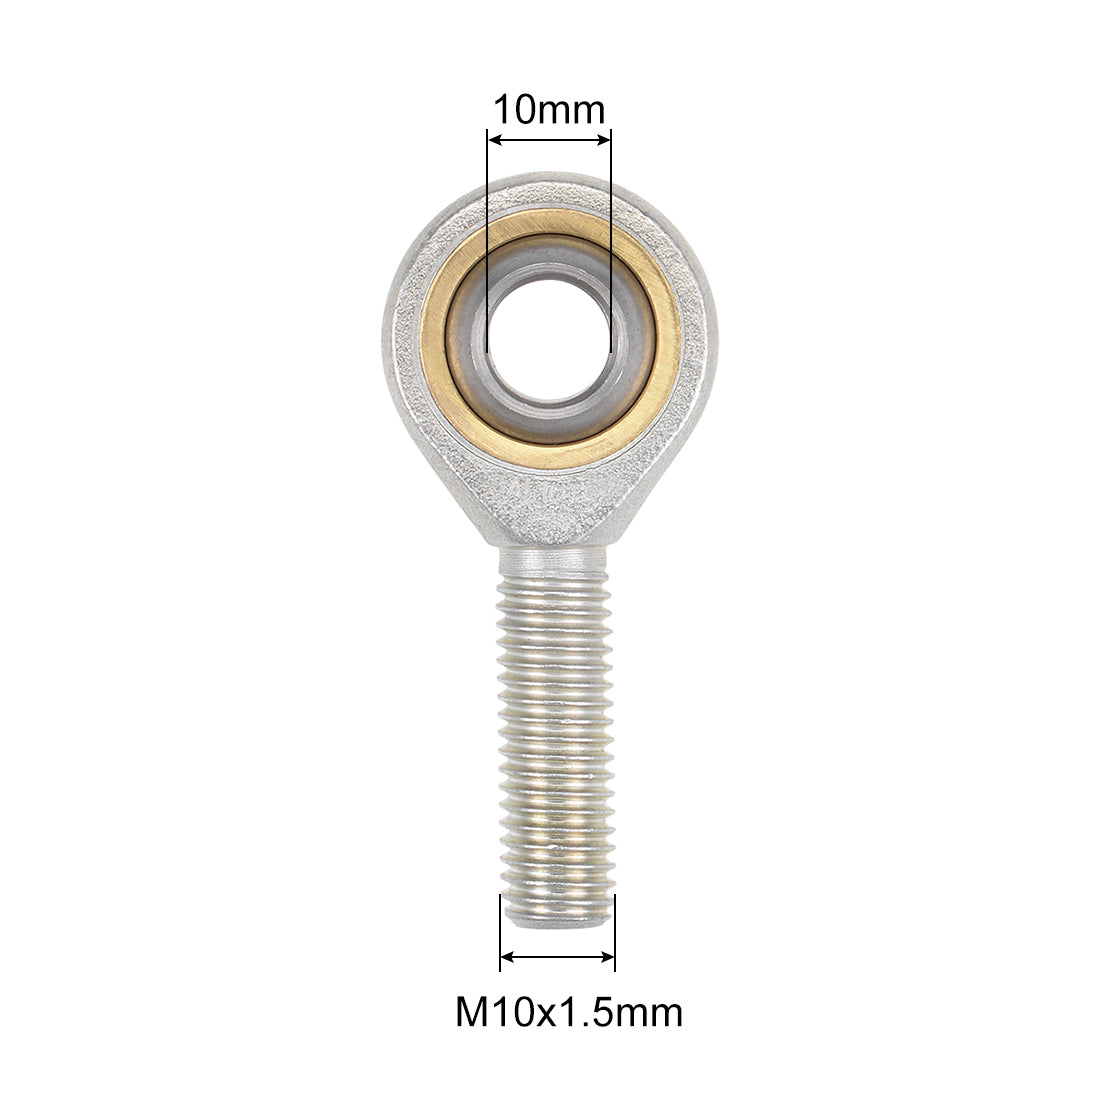 uxcell Uxcell 10mm Rod End Bearing M10x1.5mm Rod Ends Ball Joint Male Left Hand Thread